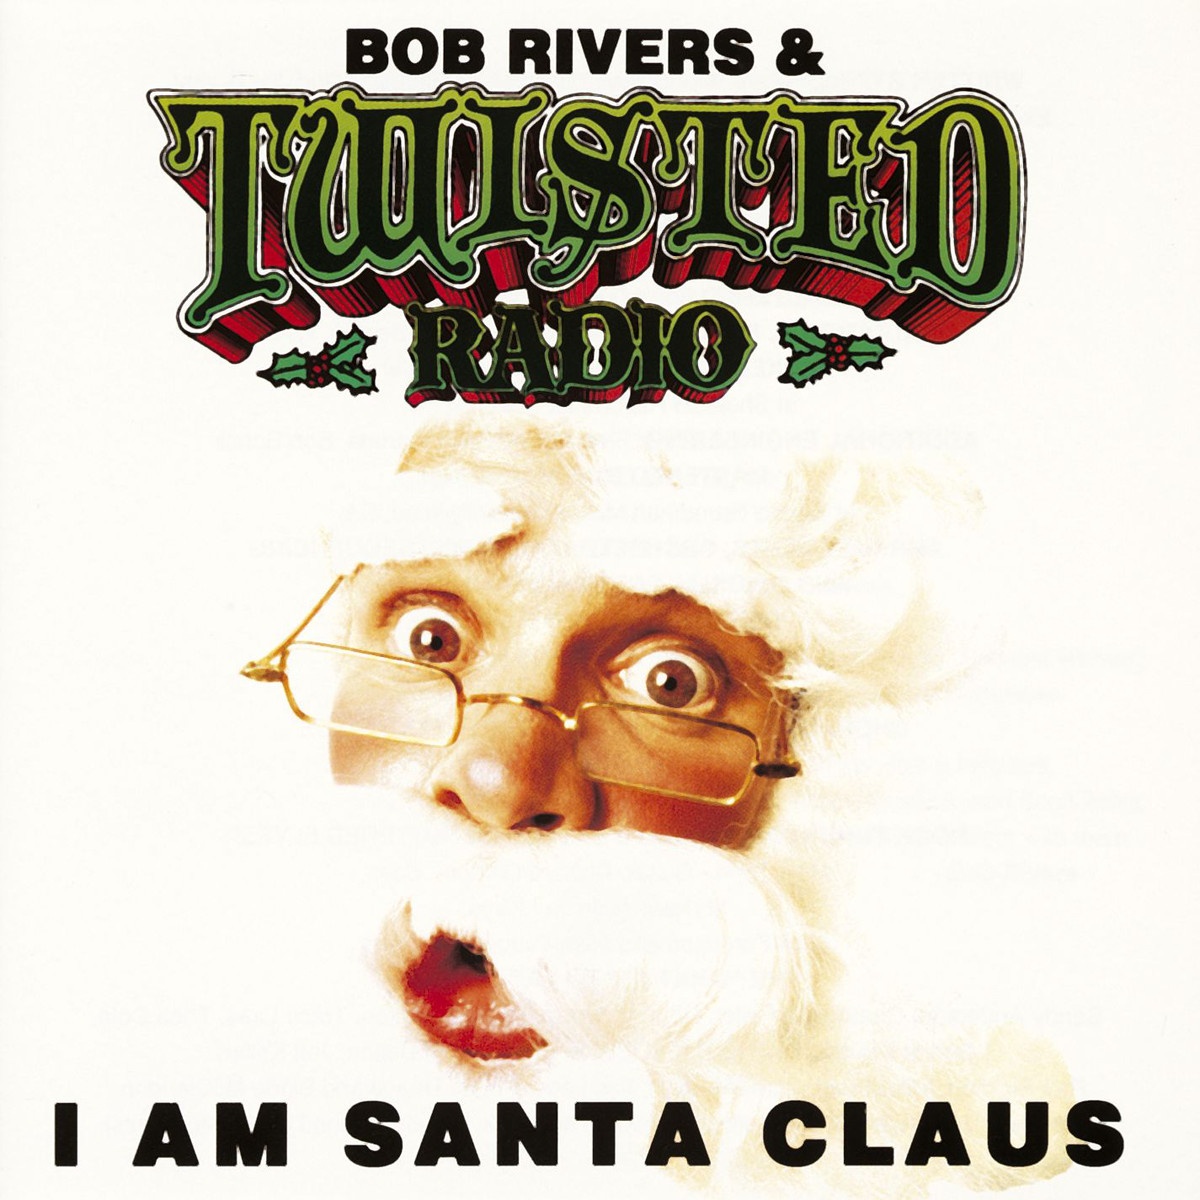 There's Another Santa Claus (LP Version)